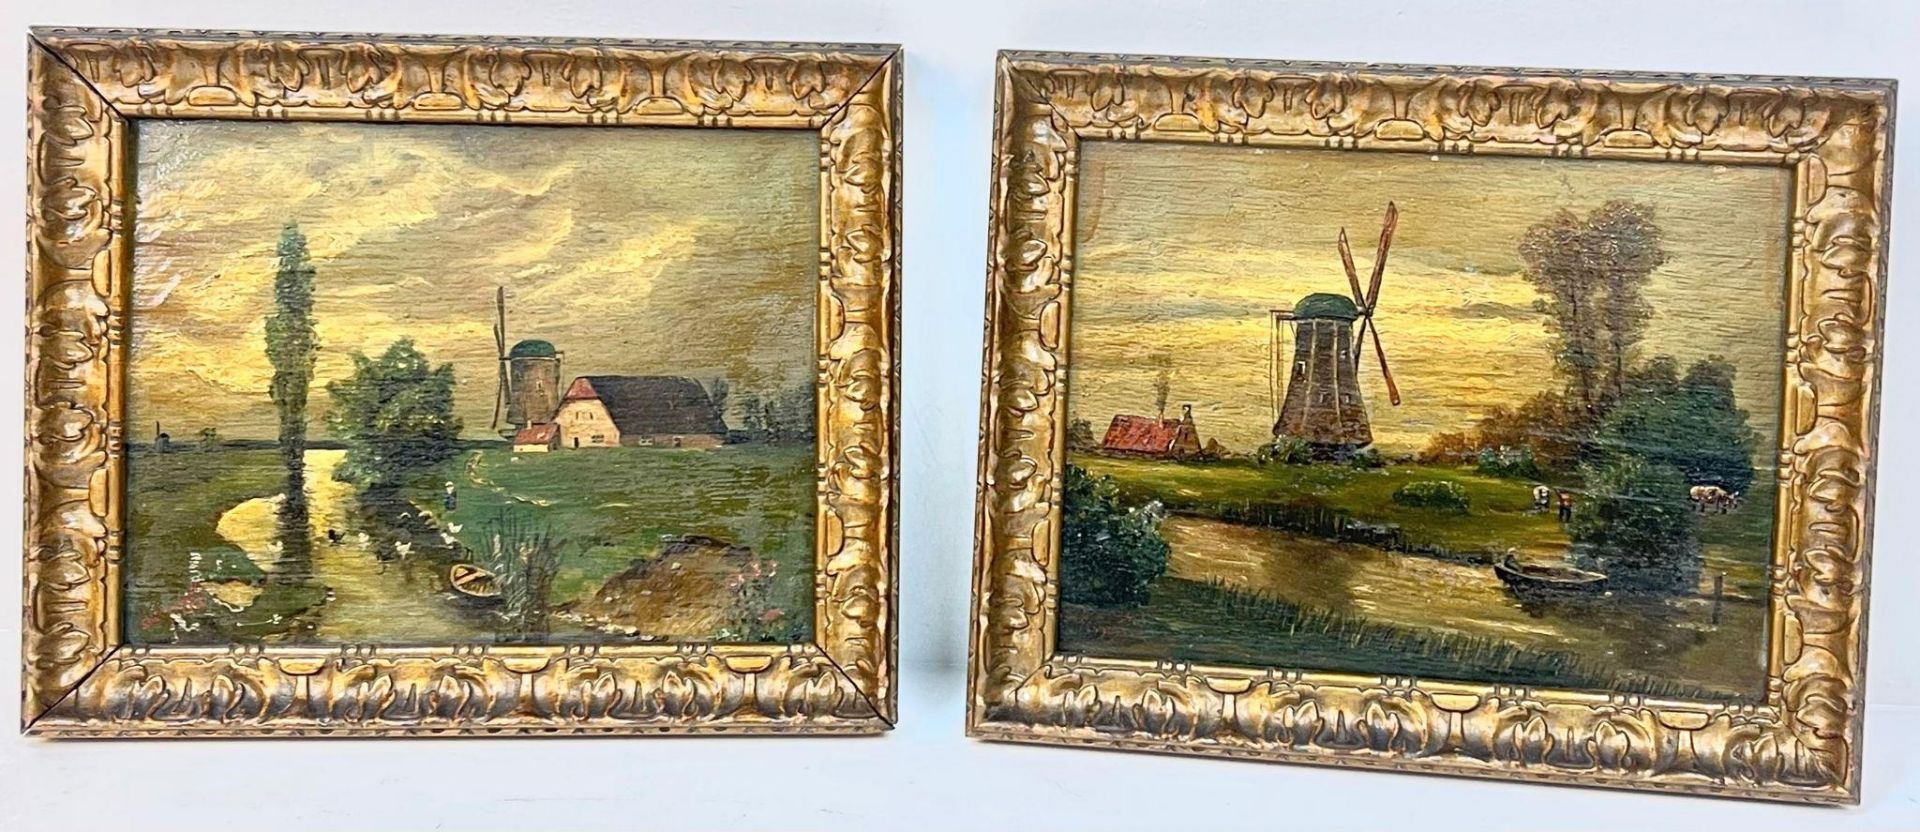 Two Antique Oil on Board Landscape Paintings of Dutch Windmills and Farmland. In gilded frames -